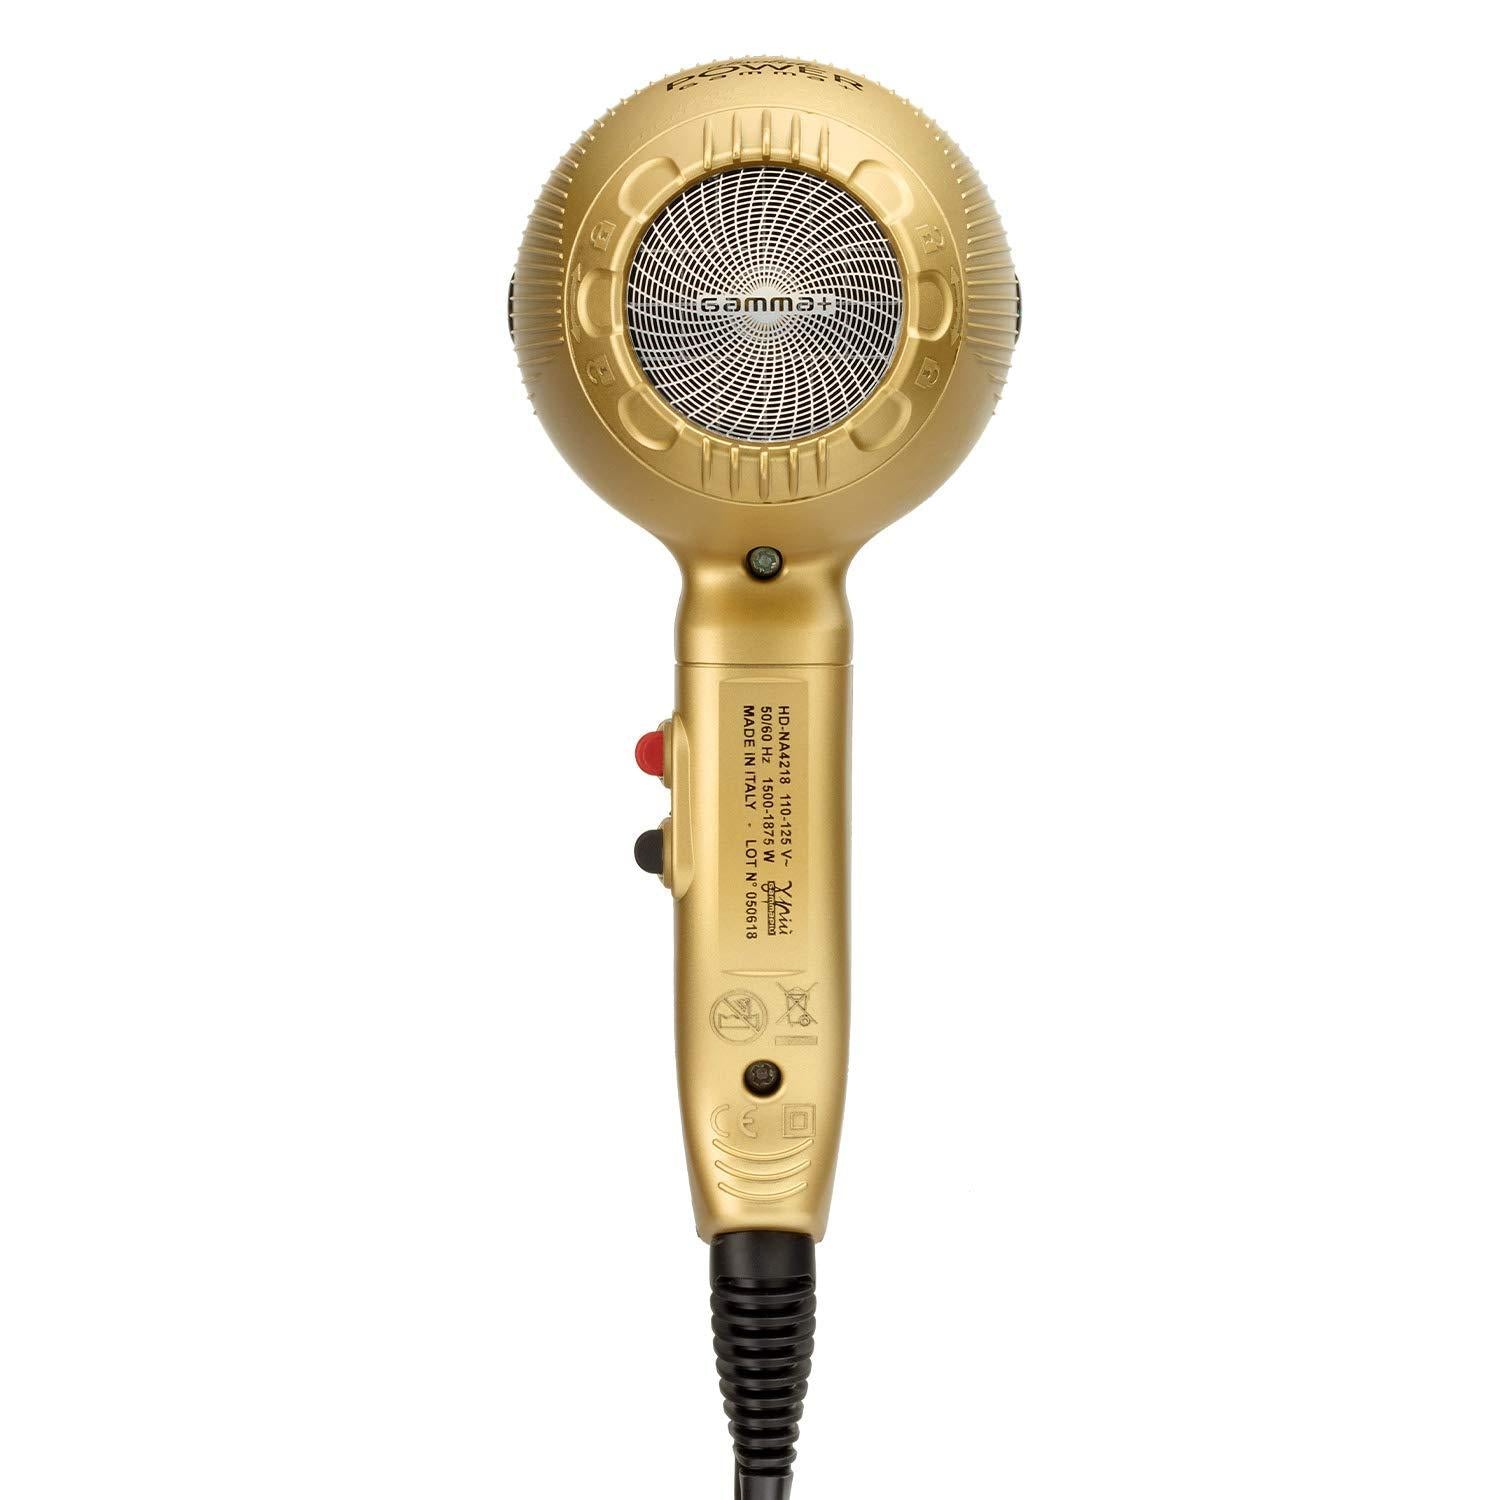 GAMMA+ Absolute Power Hair Dryer,  Gold  or Silver  Color